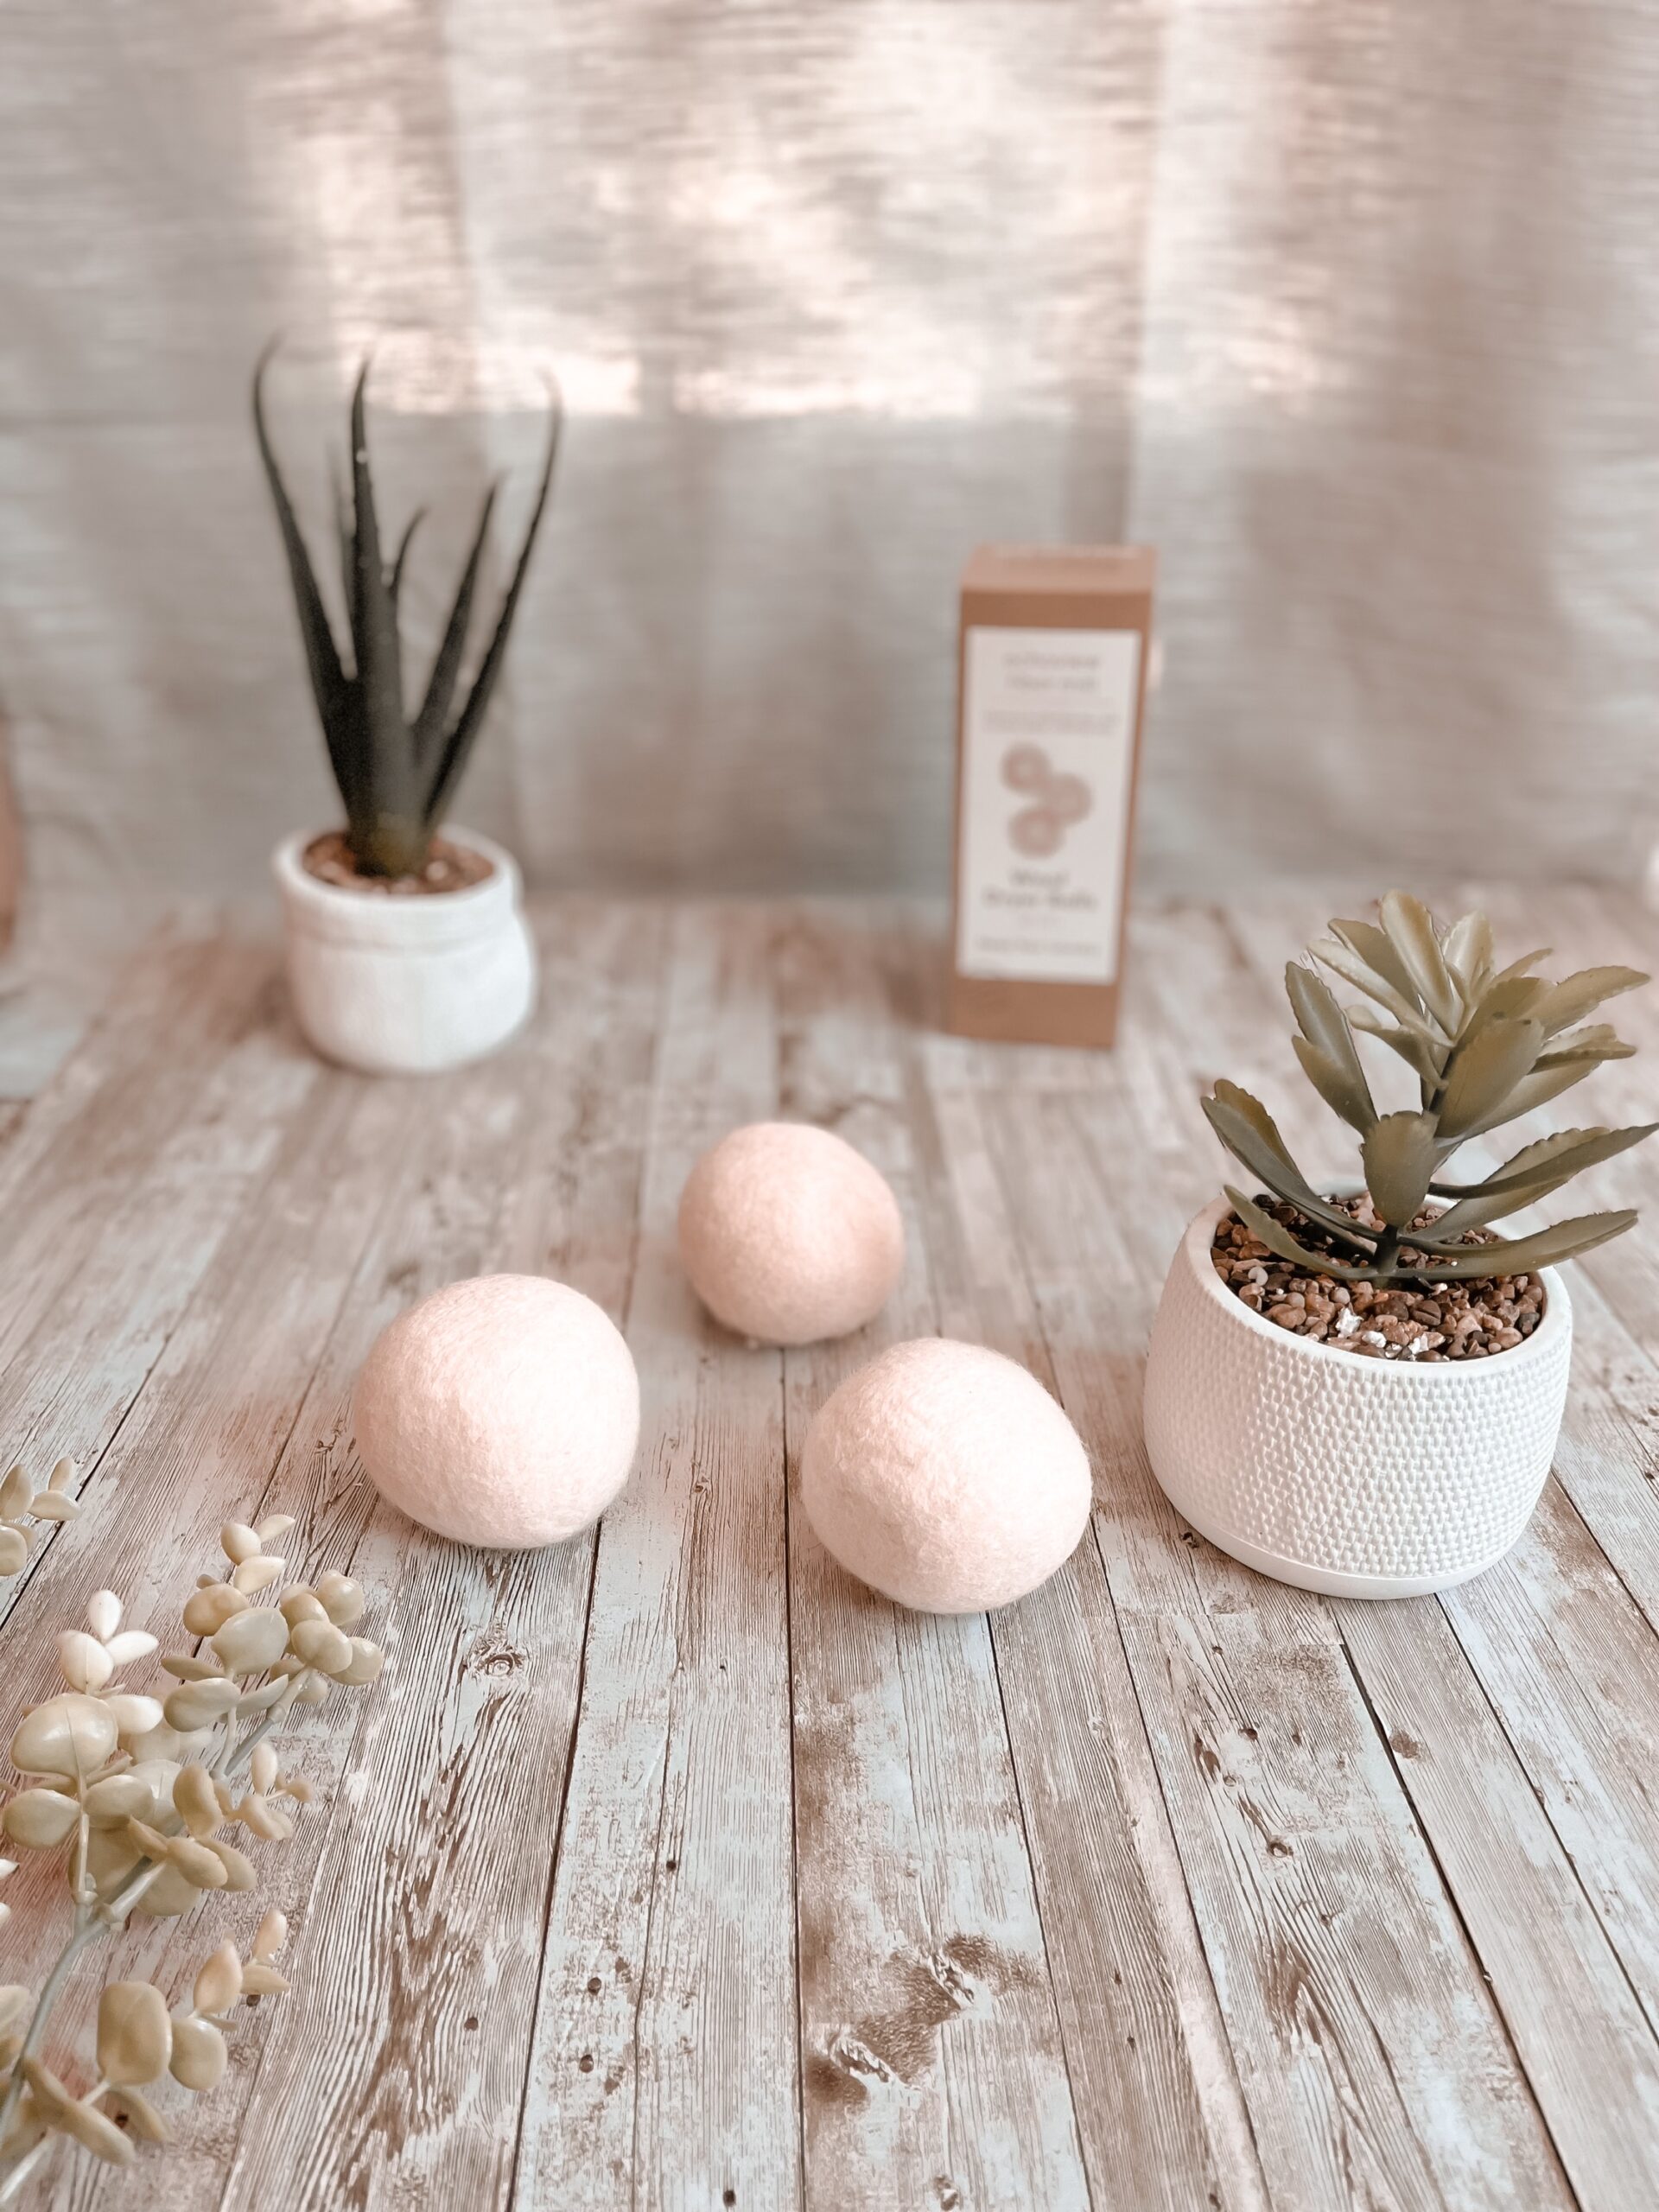 A set of 3 dryer balls is photographed with plants around it